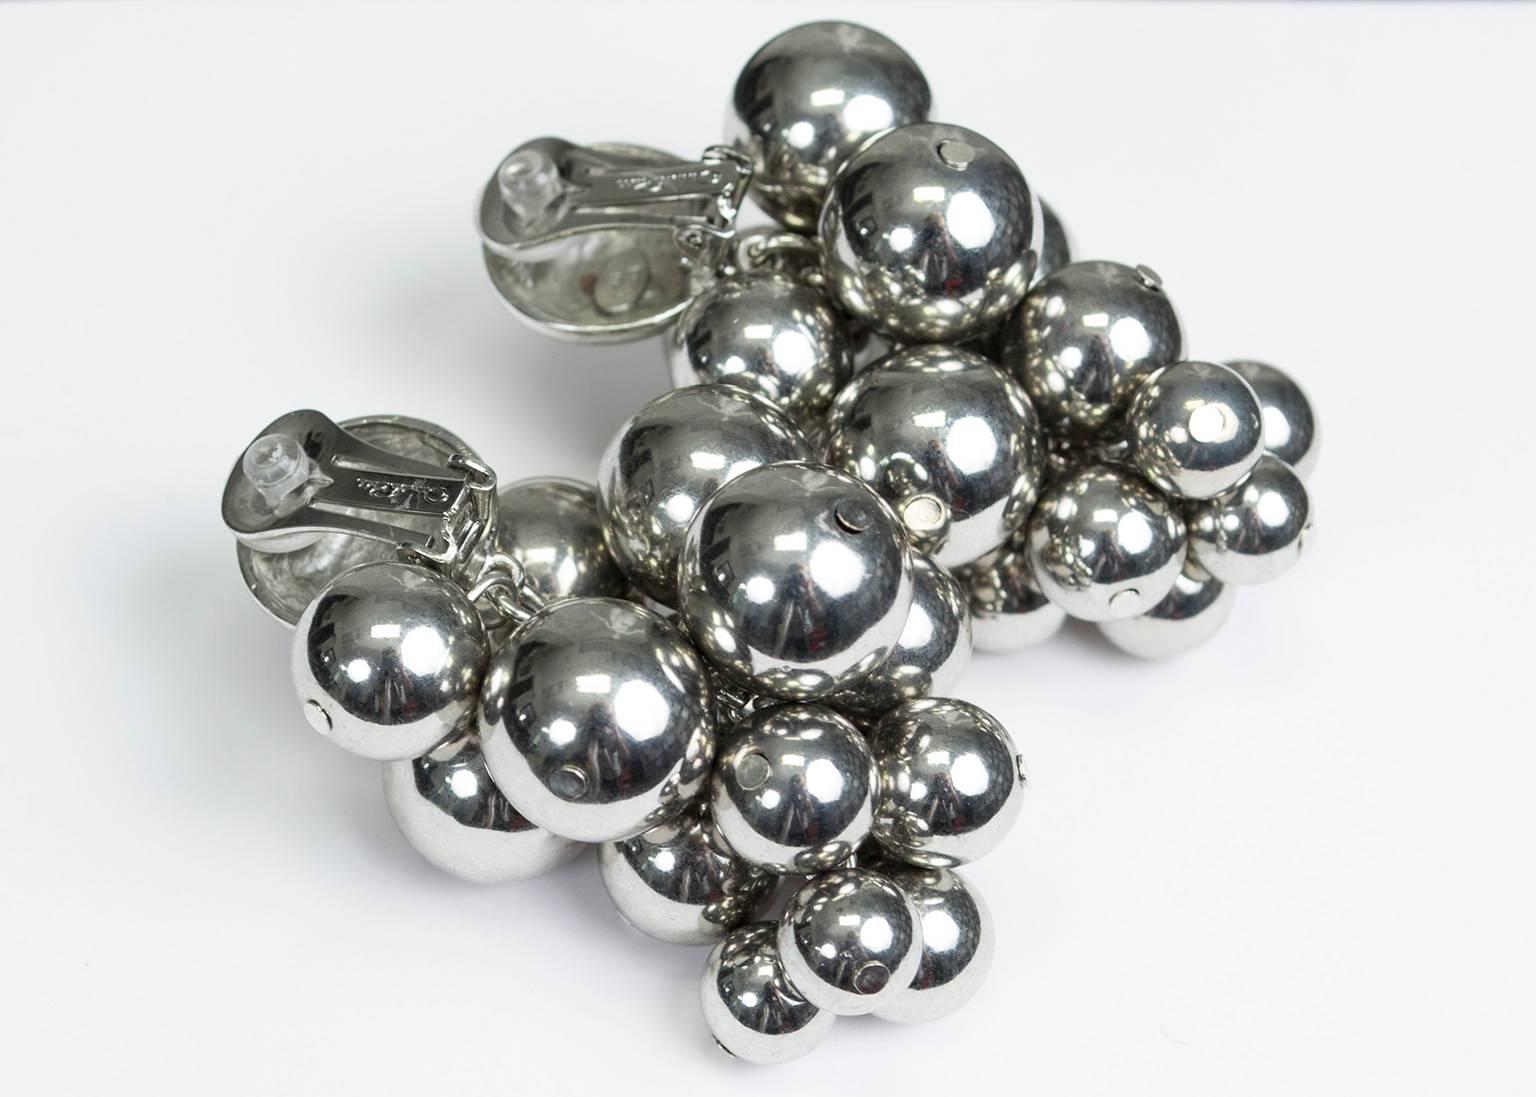 Statement-making earrings that act like spherical mirrors of all different sizes. Dramatically oversized, they resemble clusters of silver grapes and provide brilliant shine.

Clip back earrings featuring a half-round button above a cluster of 15